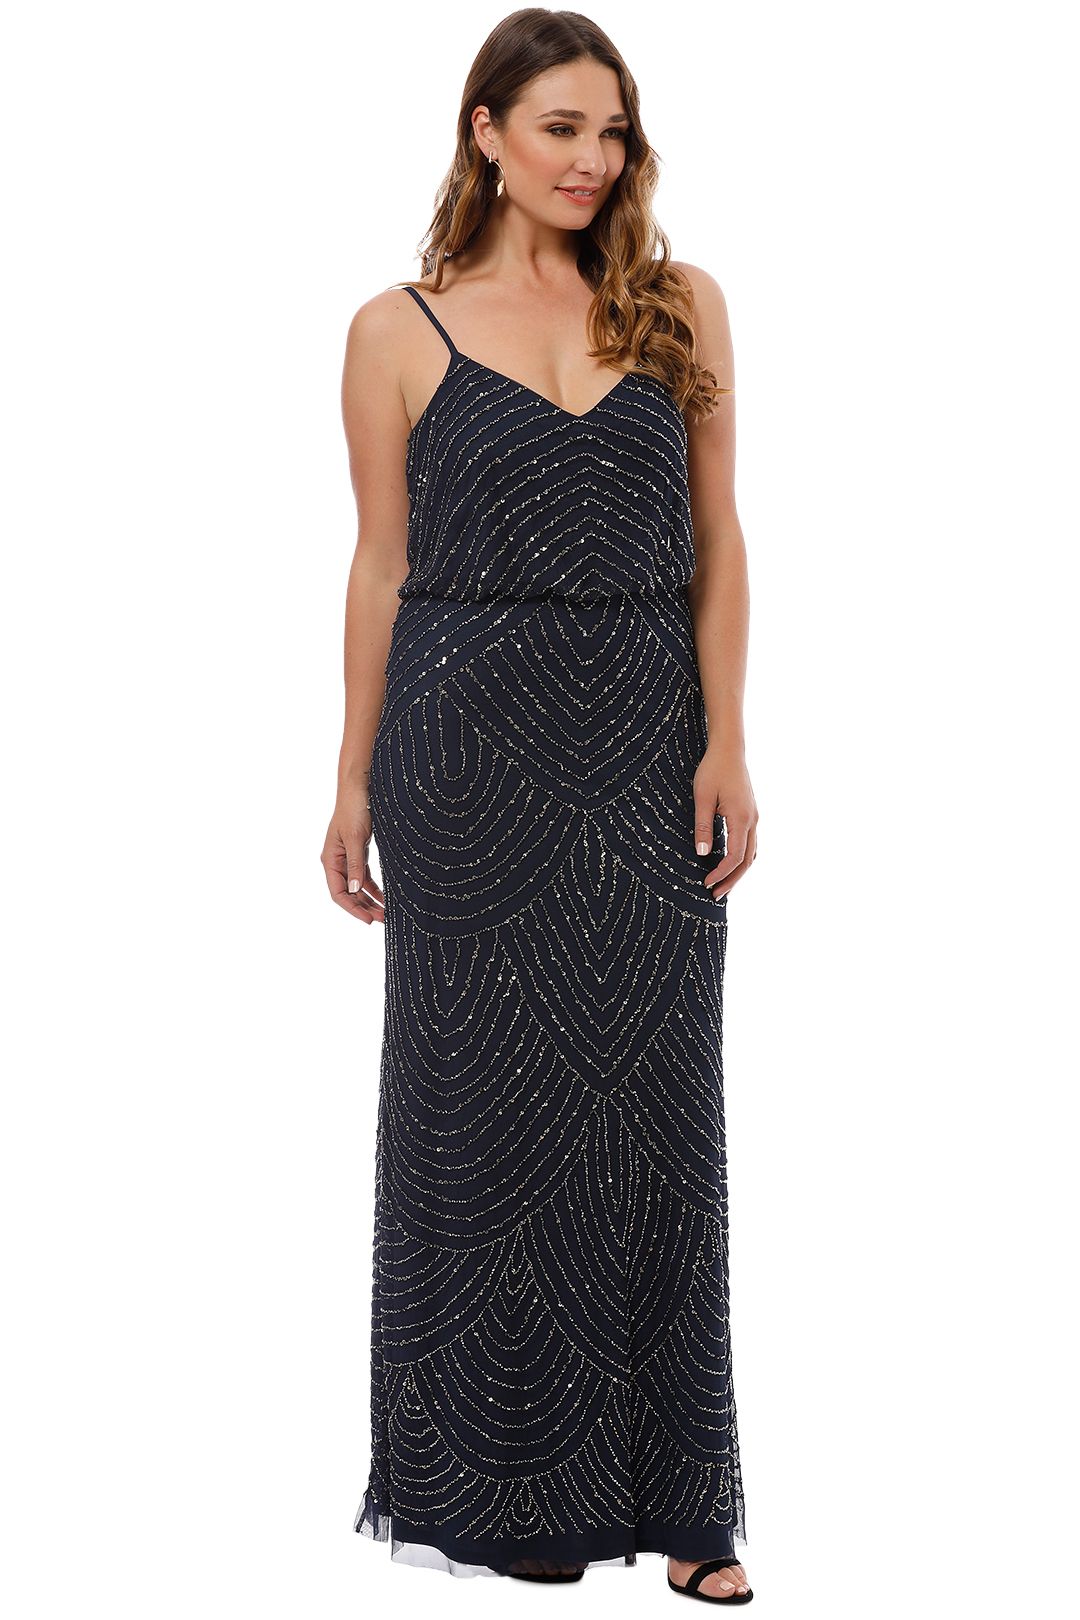 Adrianna Papell - Art Deco Beaded Gown - Navy - Side